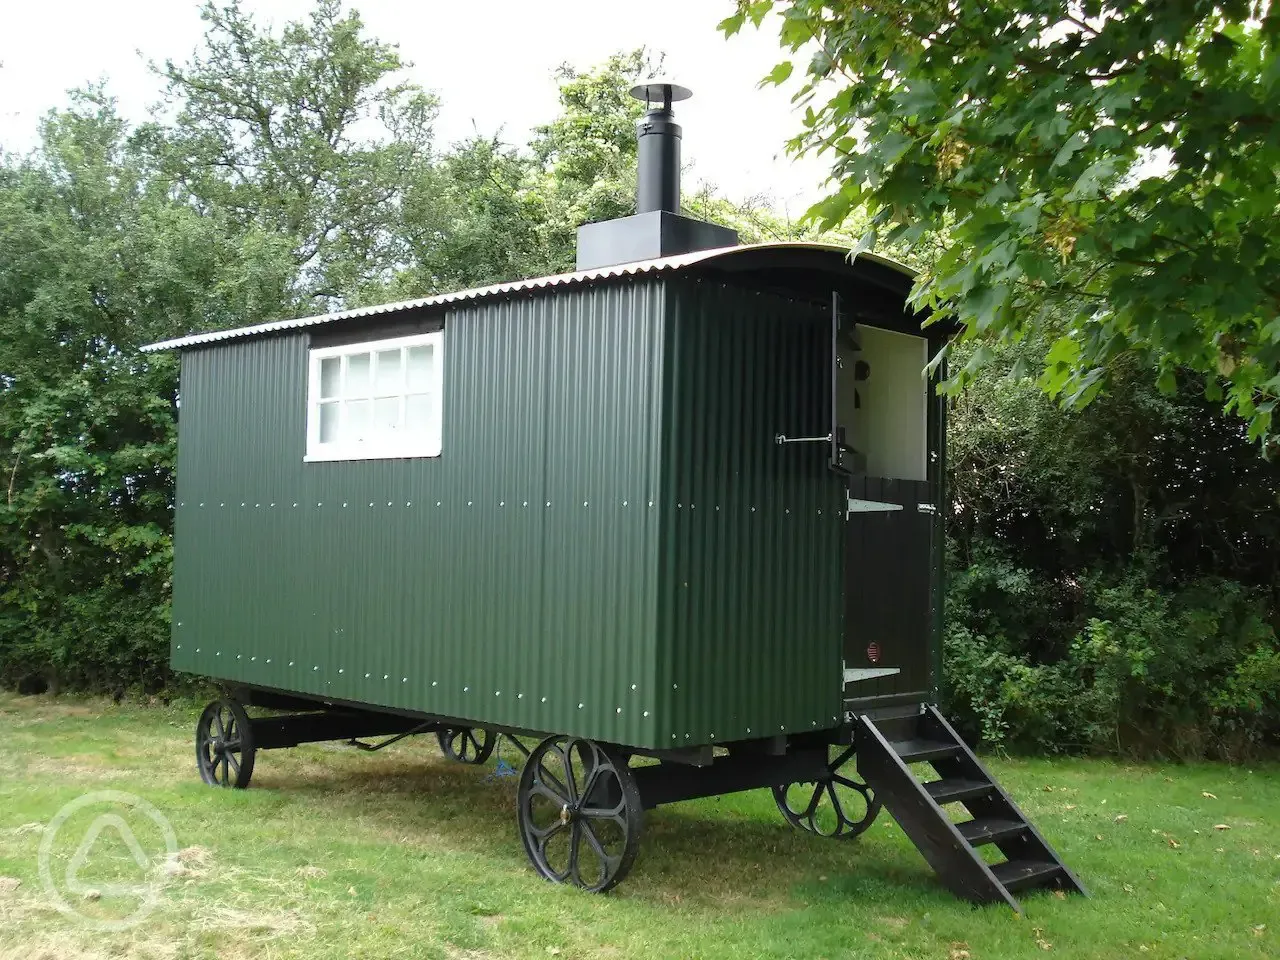 Shepherd's hut built to a traditional design